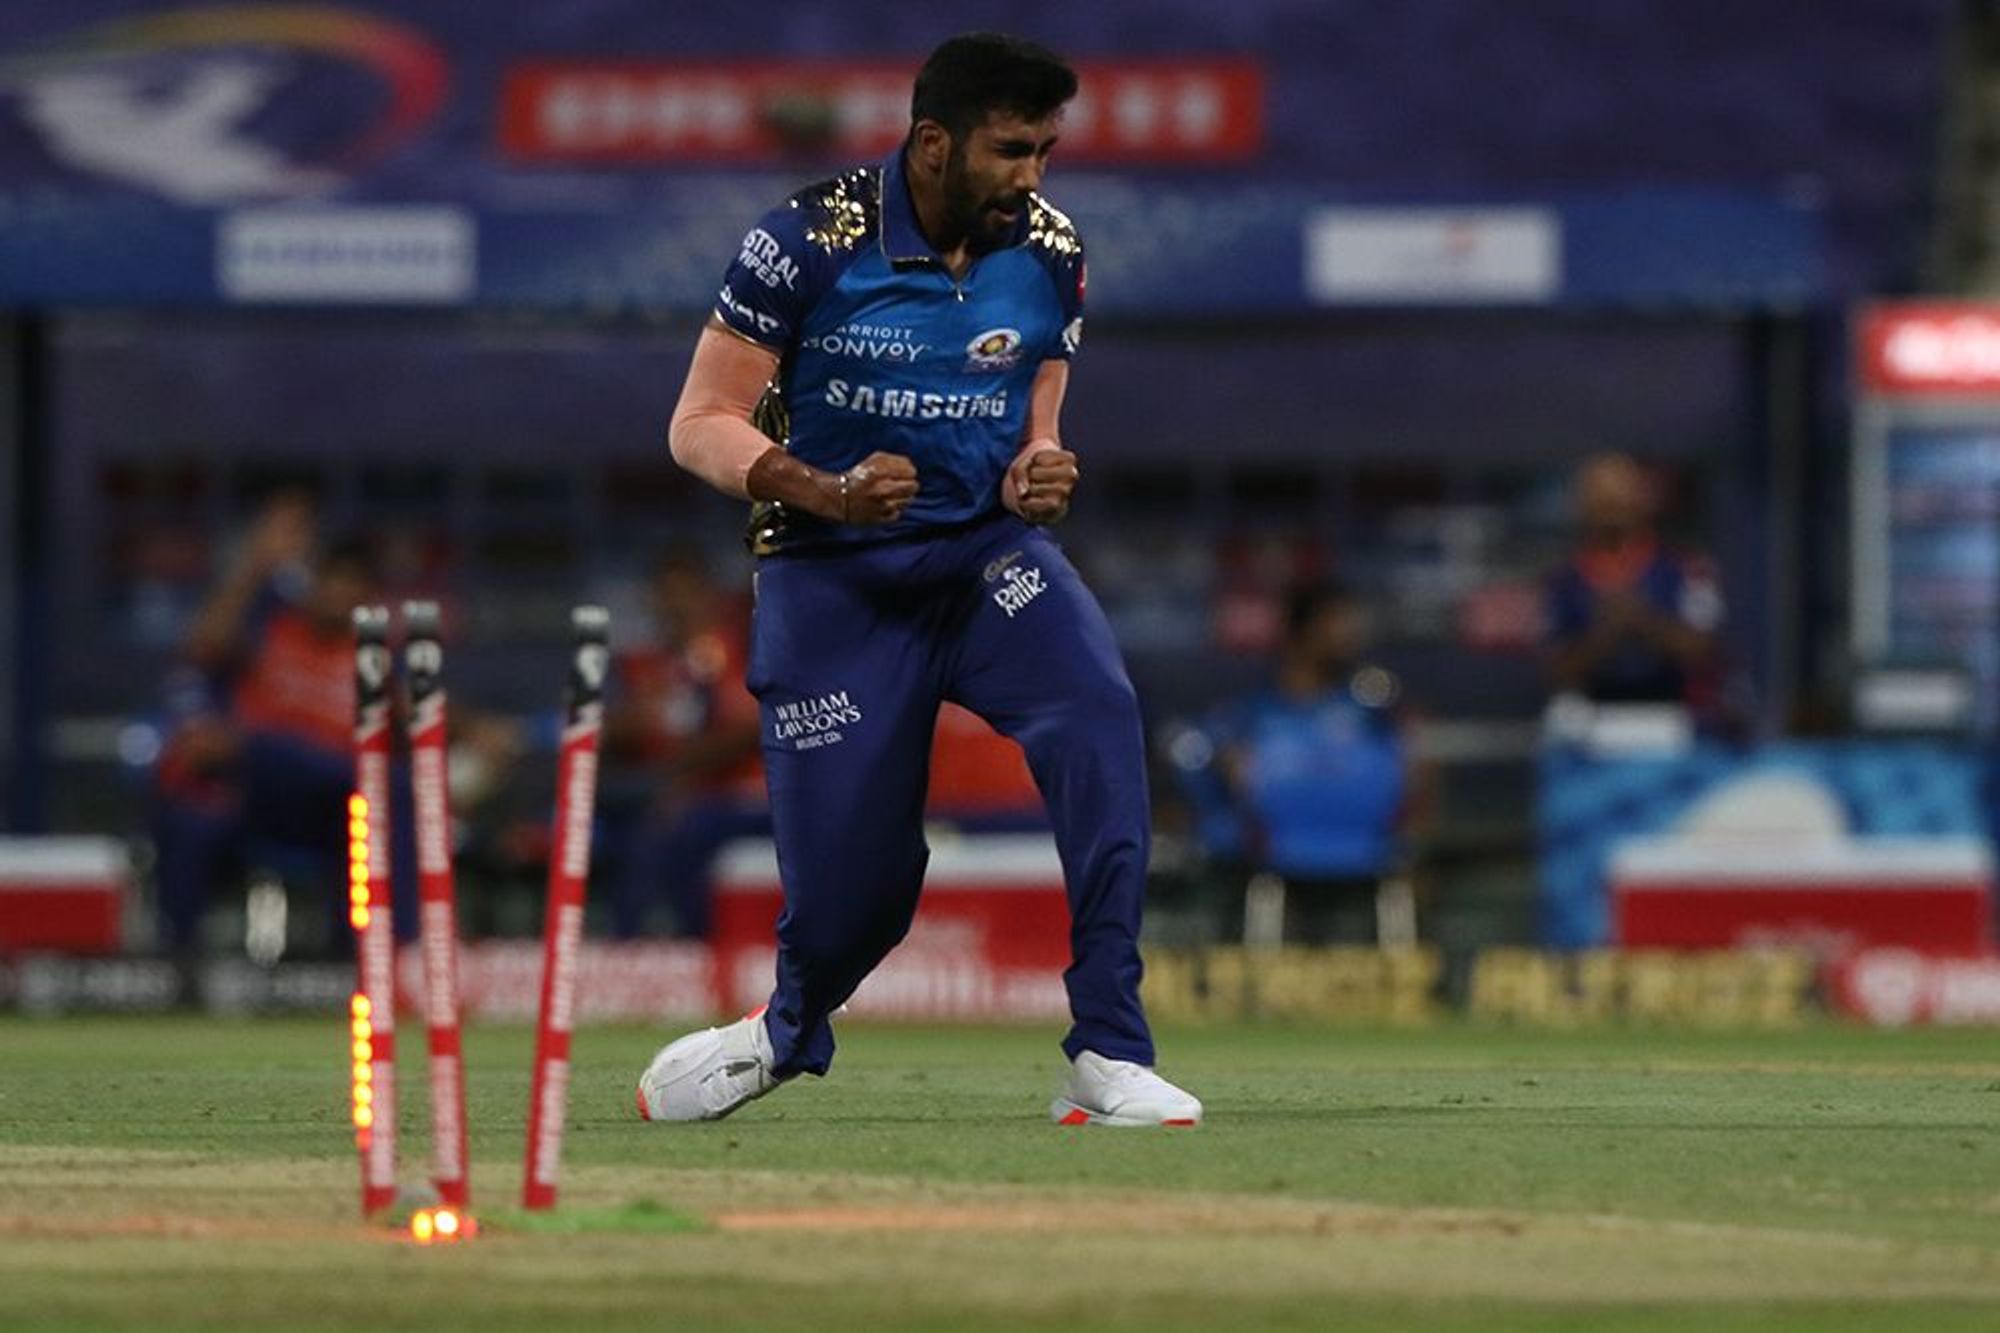 Twitter reacts to Jasprit Bumrah obeying Danny Morrison’s orders to knock-over Mayank Agarwal